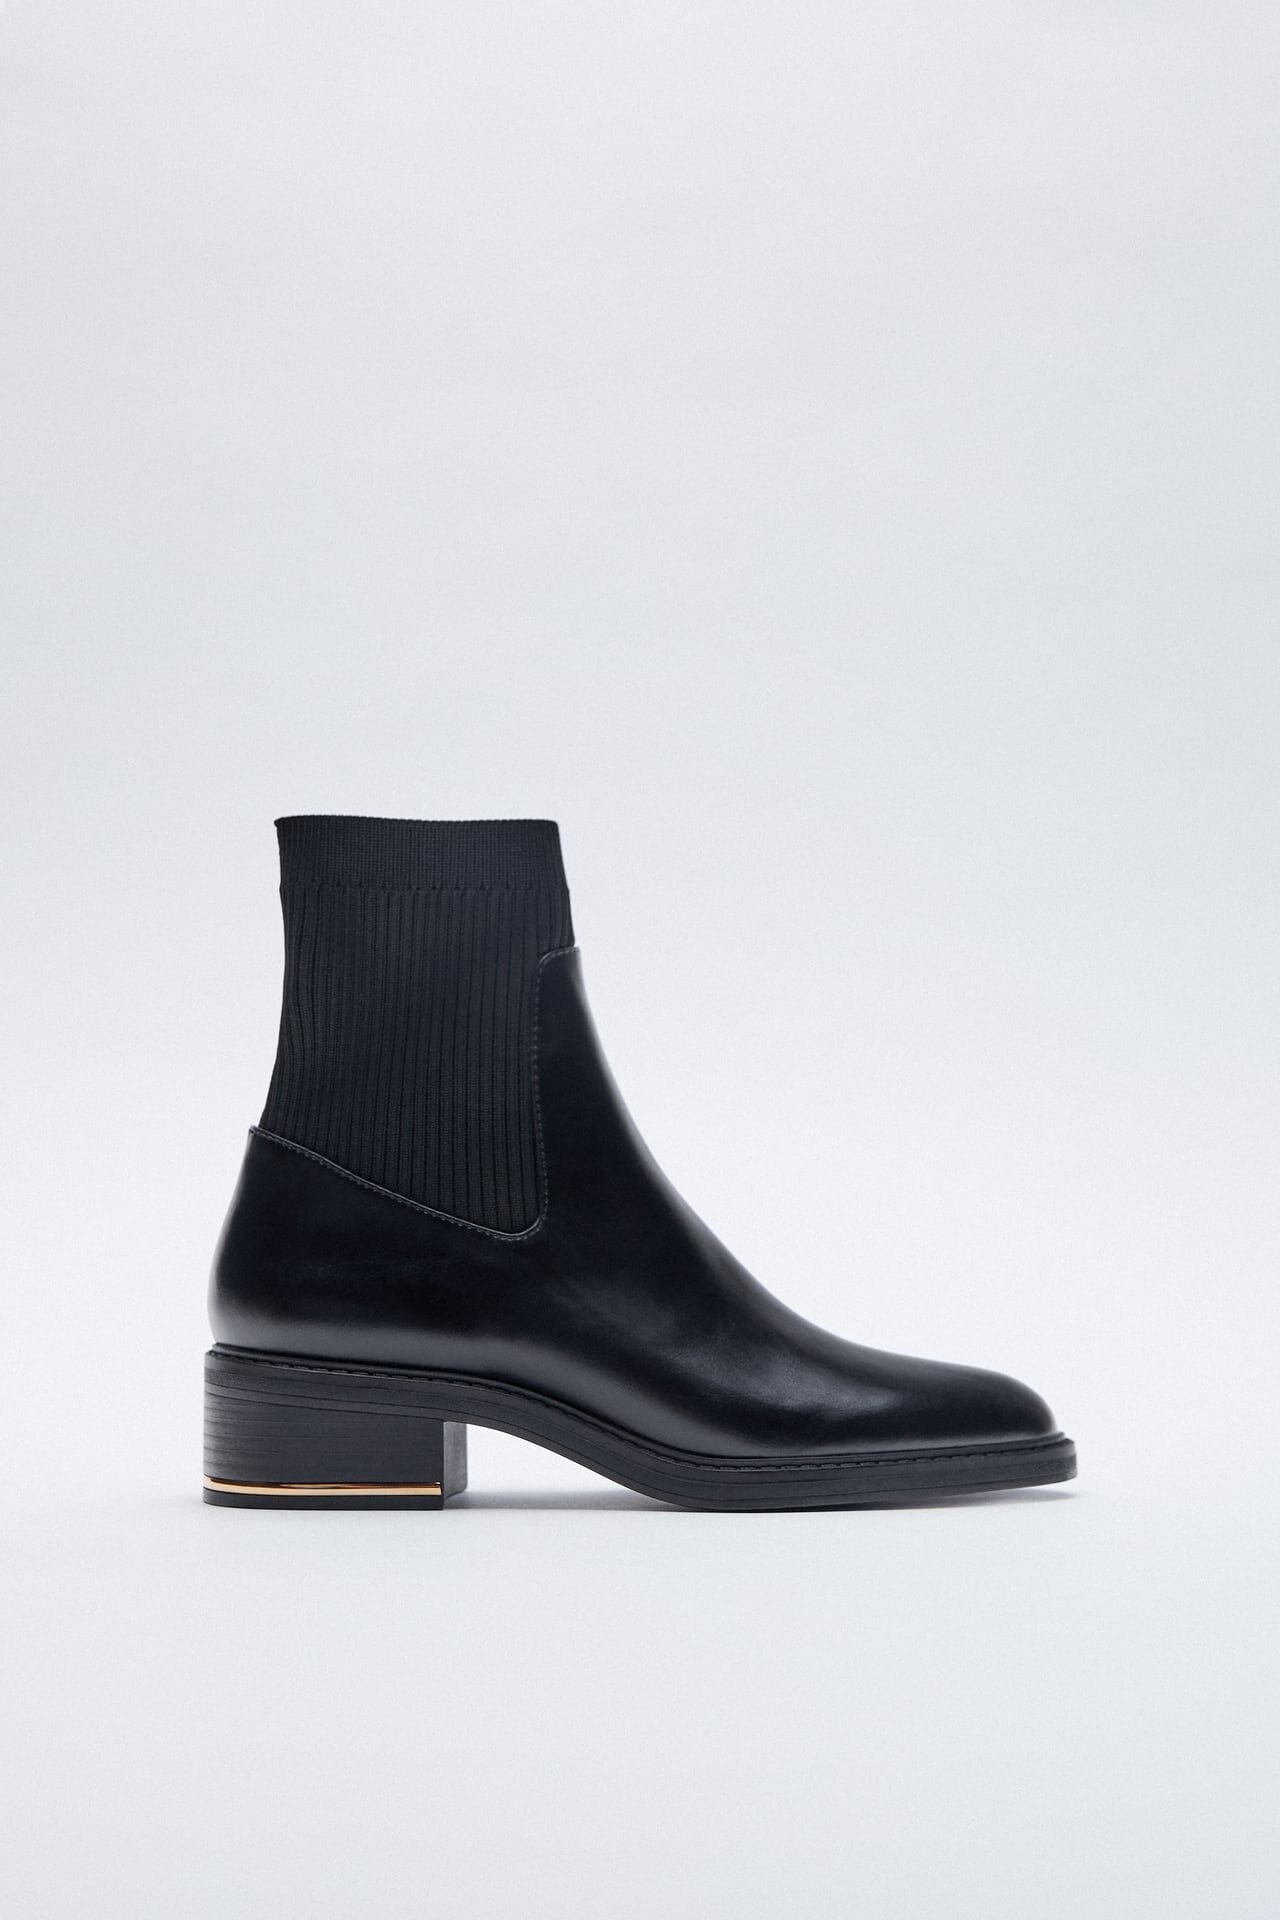 Shop ZARA RIBBED SOCK STYLE ANKLE BOOTS (2164/310) by COSMICSTAR | BUYMA